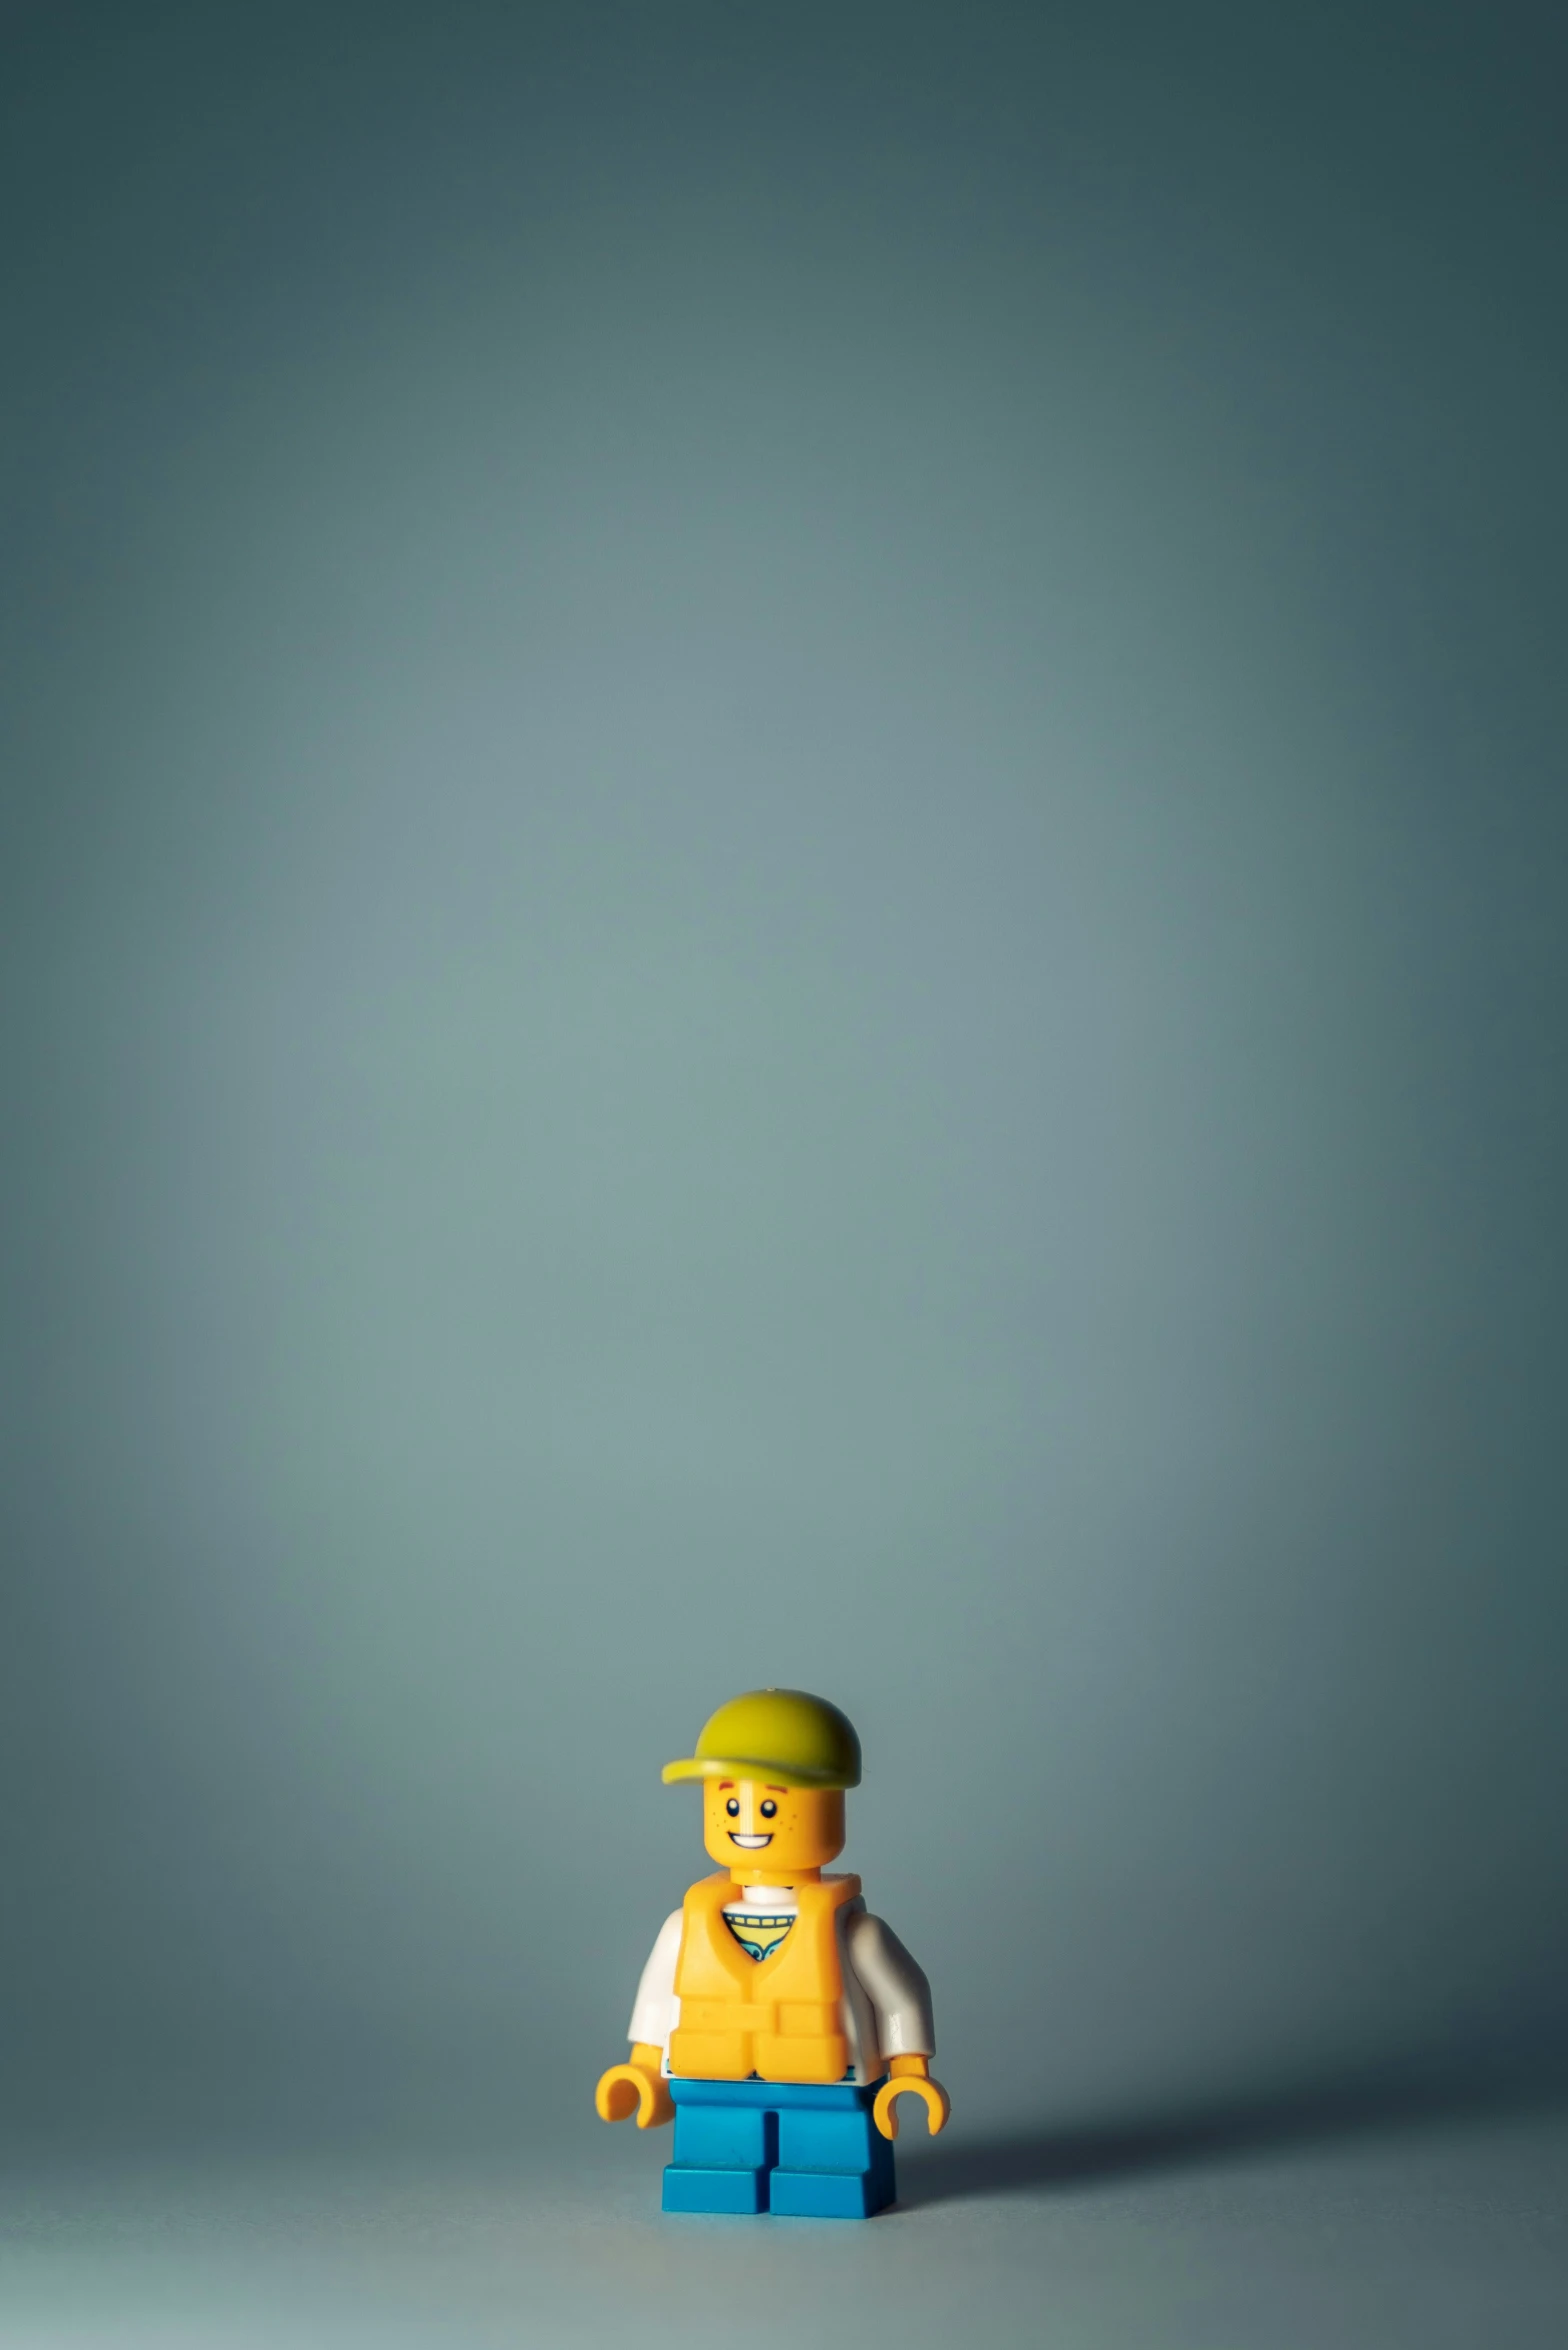 a lego figure standing on the ground wearing a yellow shirt